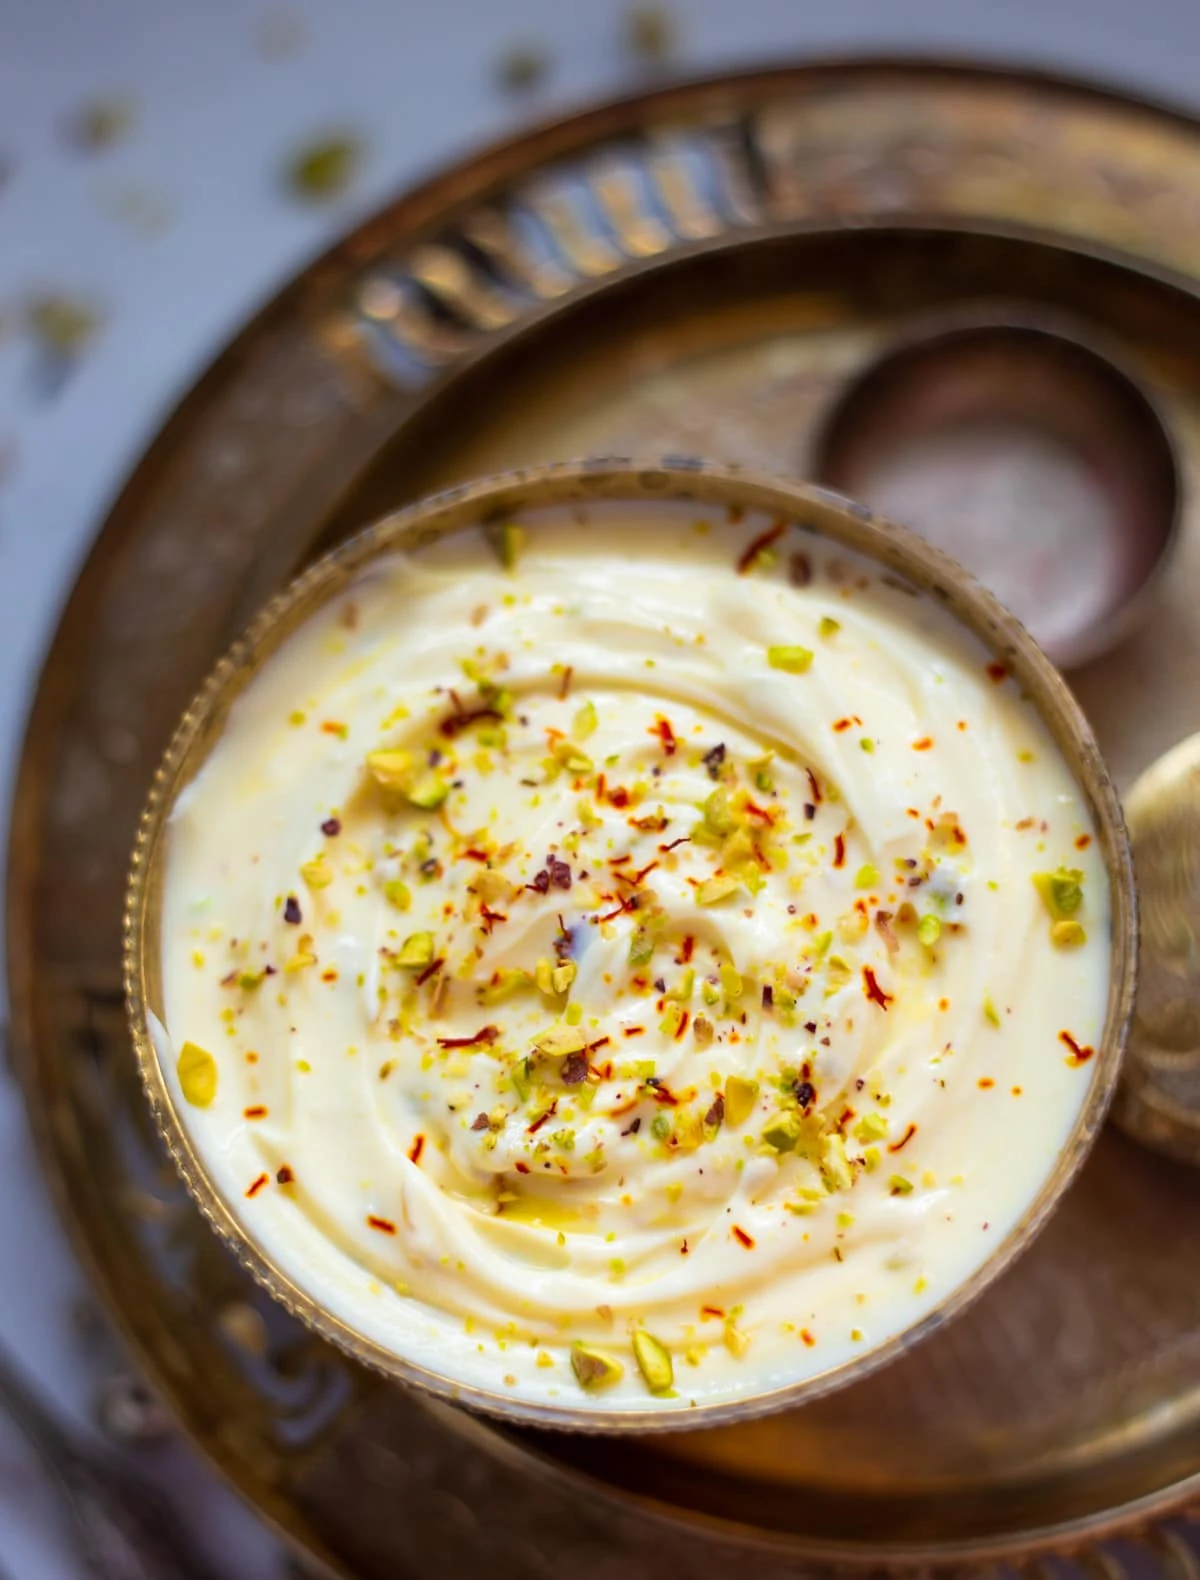 Shrikhand in a pretty bowl garnished with saffron and pistachios - Kesar Pista shrikhand